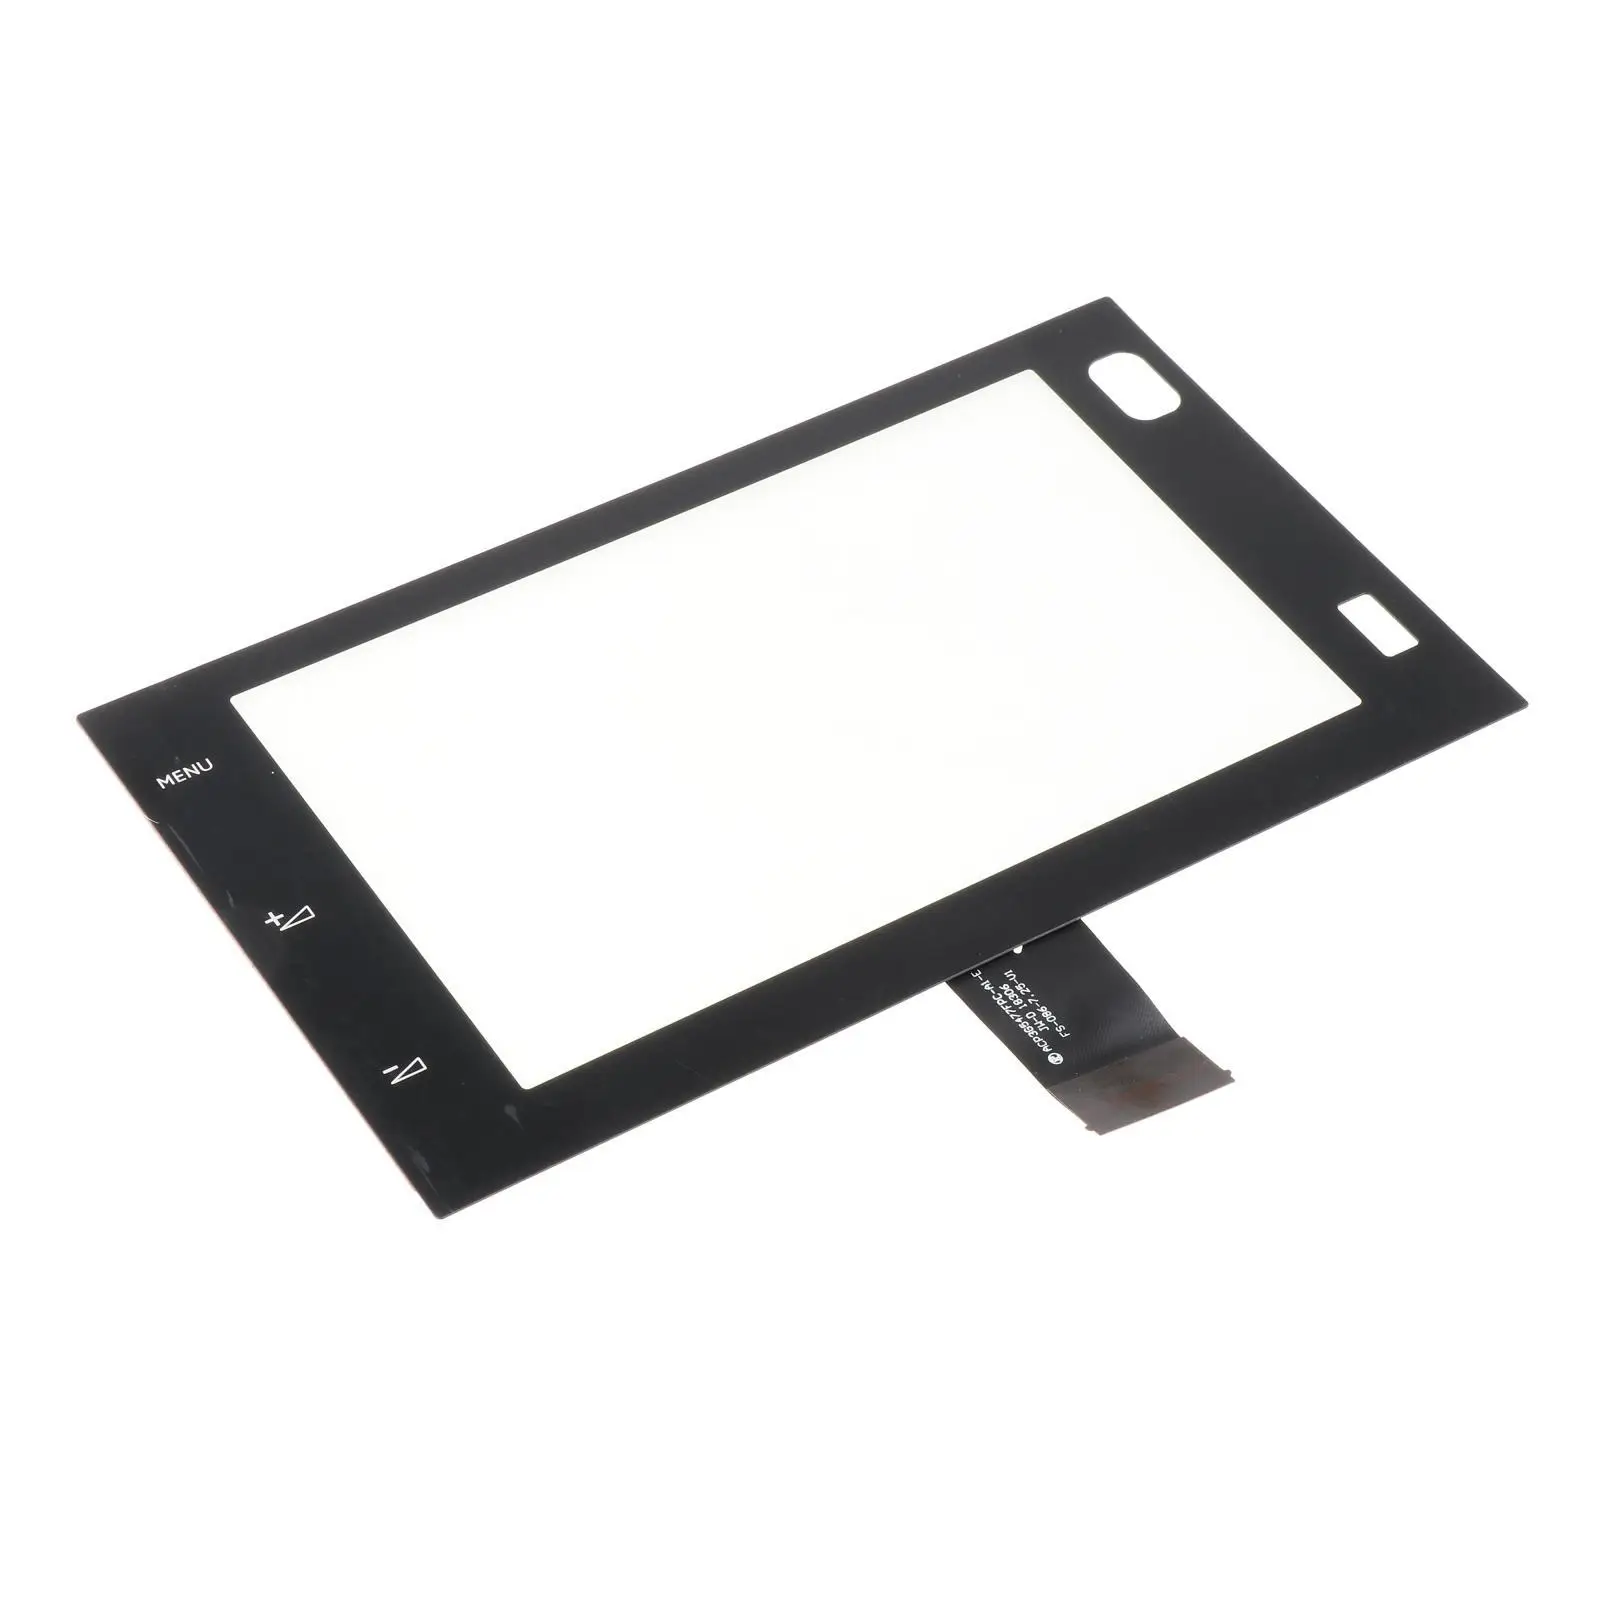 7inch Touch Digitizer Panel Car Monitors Car Supplies Replacement Fits for SUV Peugeot 2008 Touch Screen Black Vehicle Parts